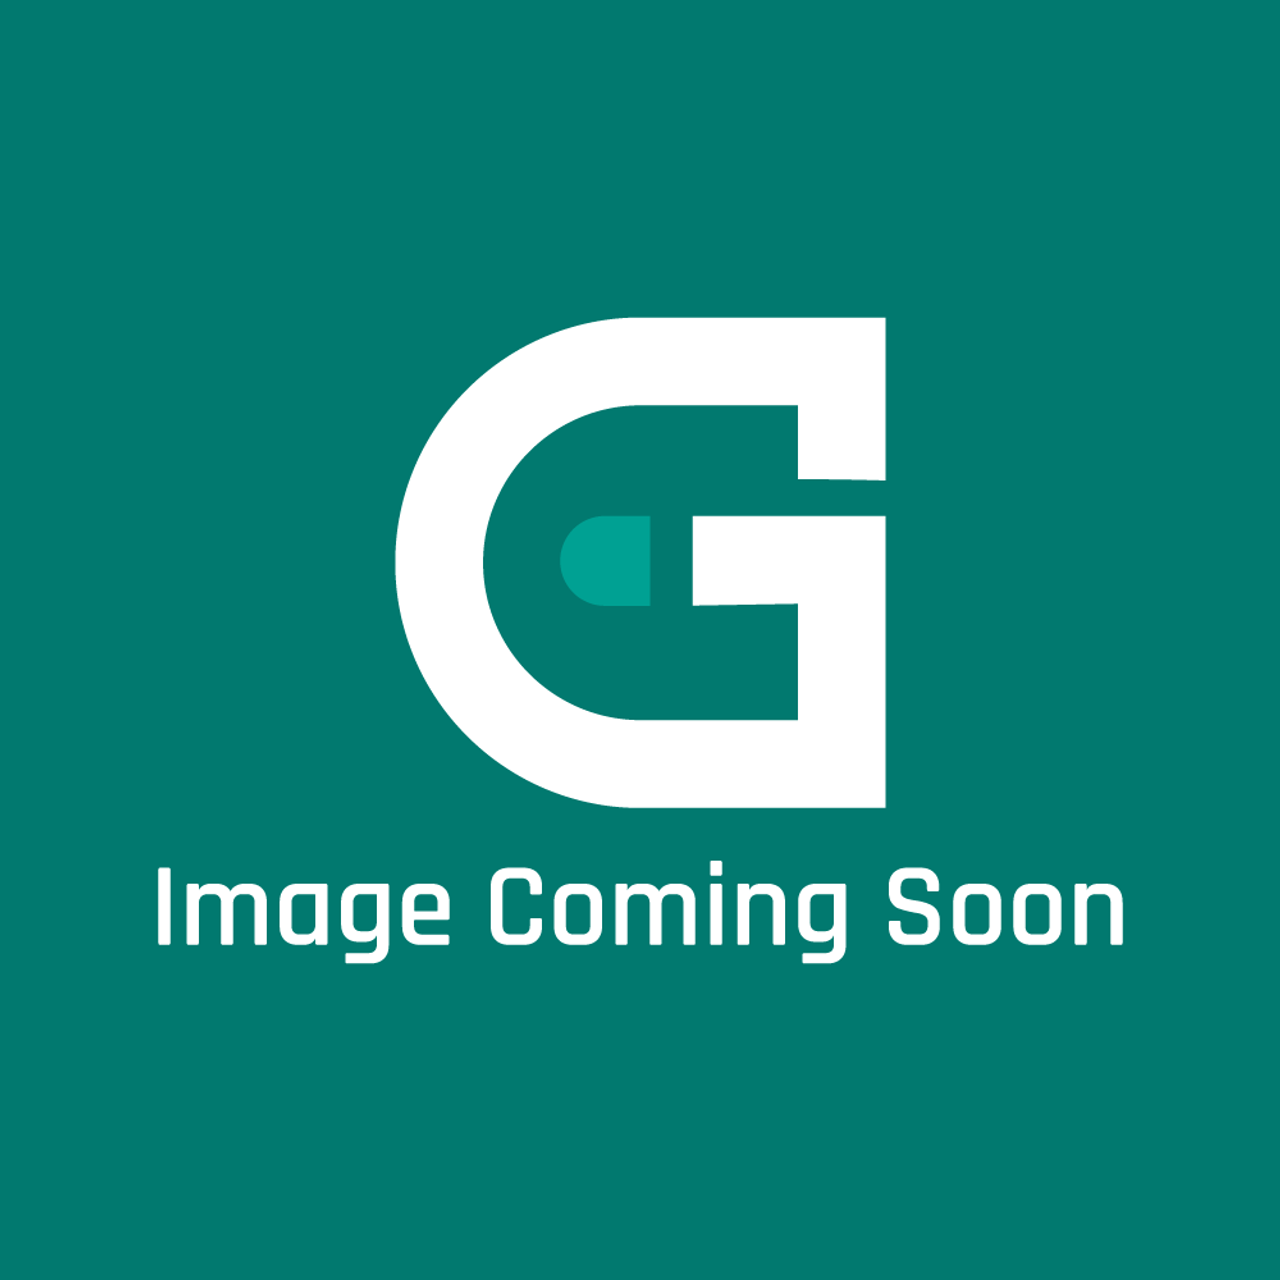 GE Appliances WB15K10085 - Extruded Handle - Image Coming Soon!